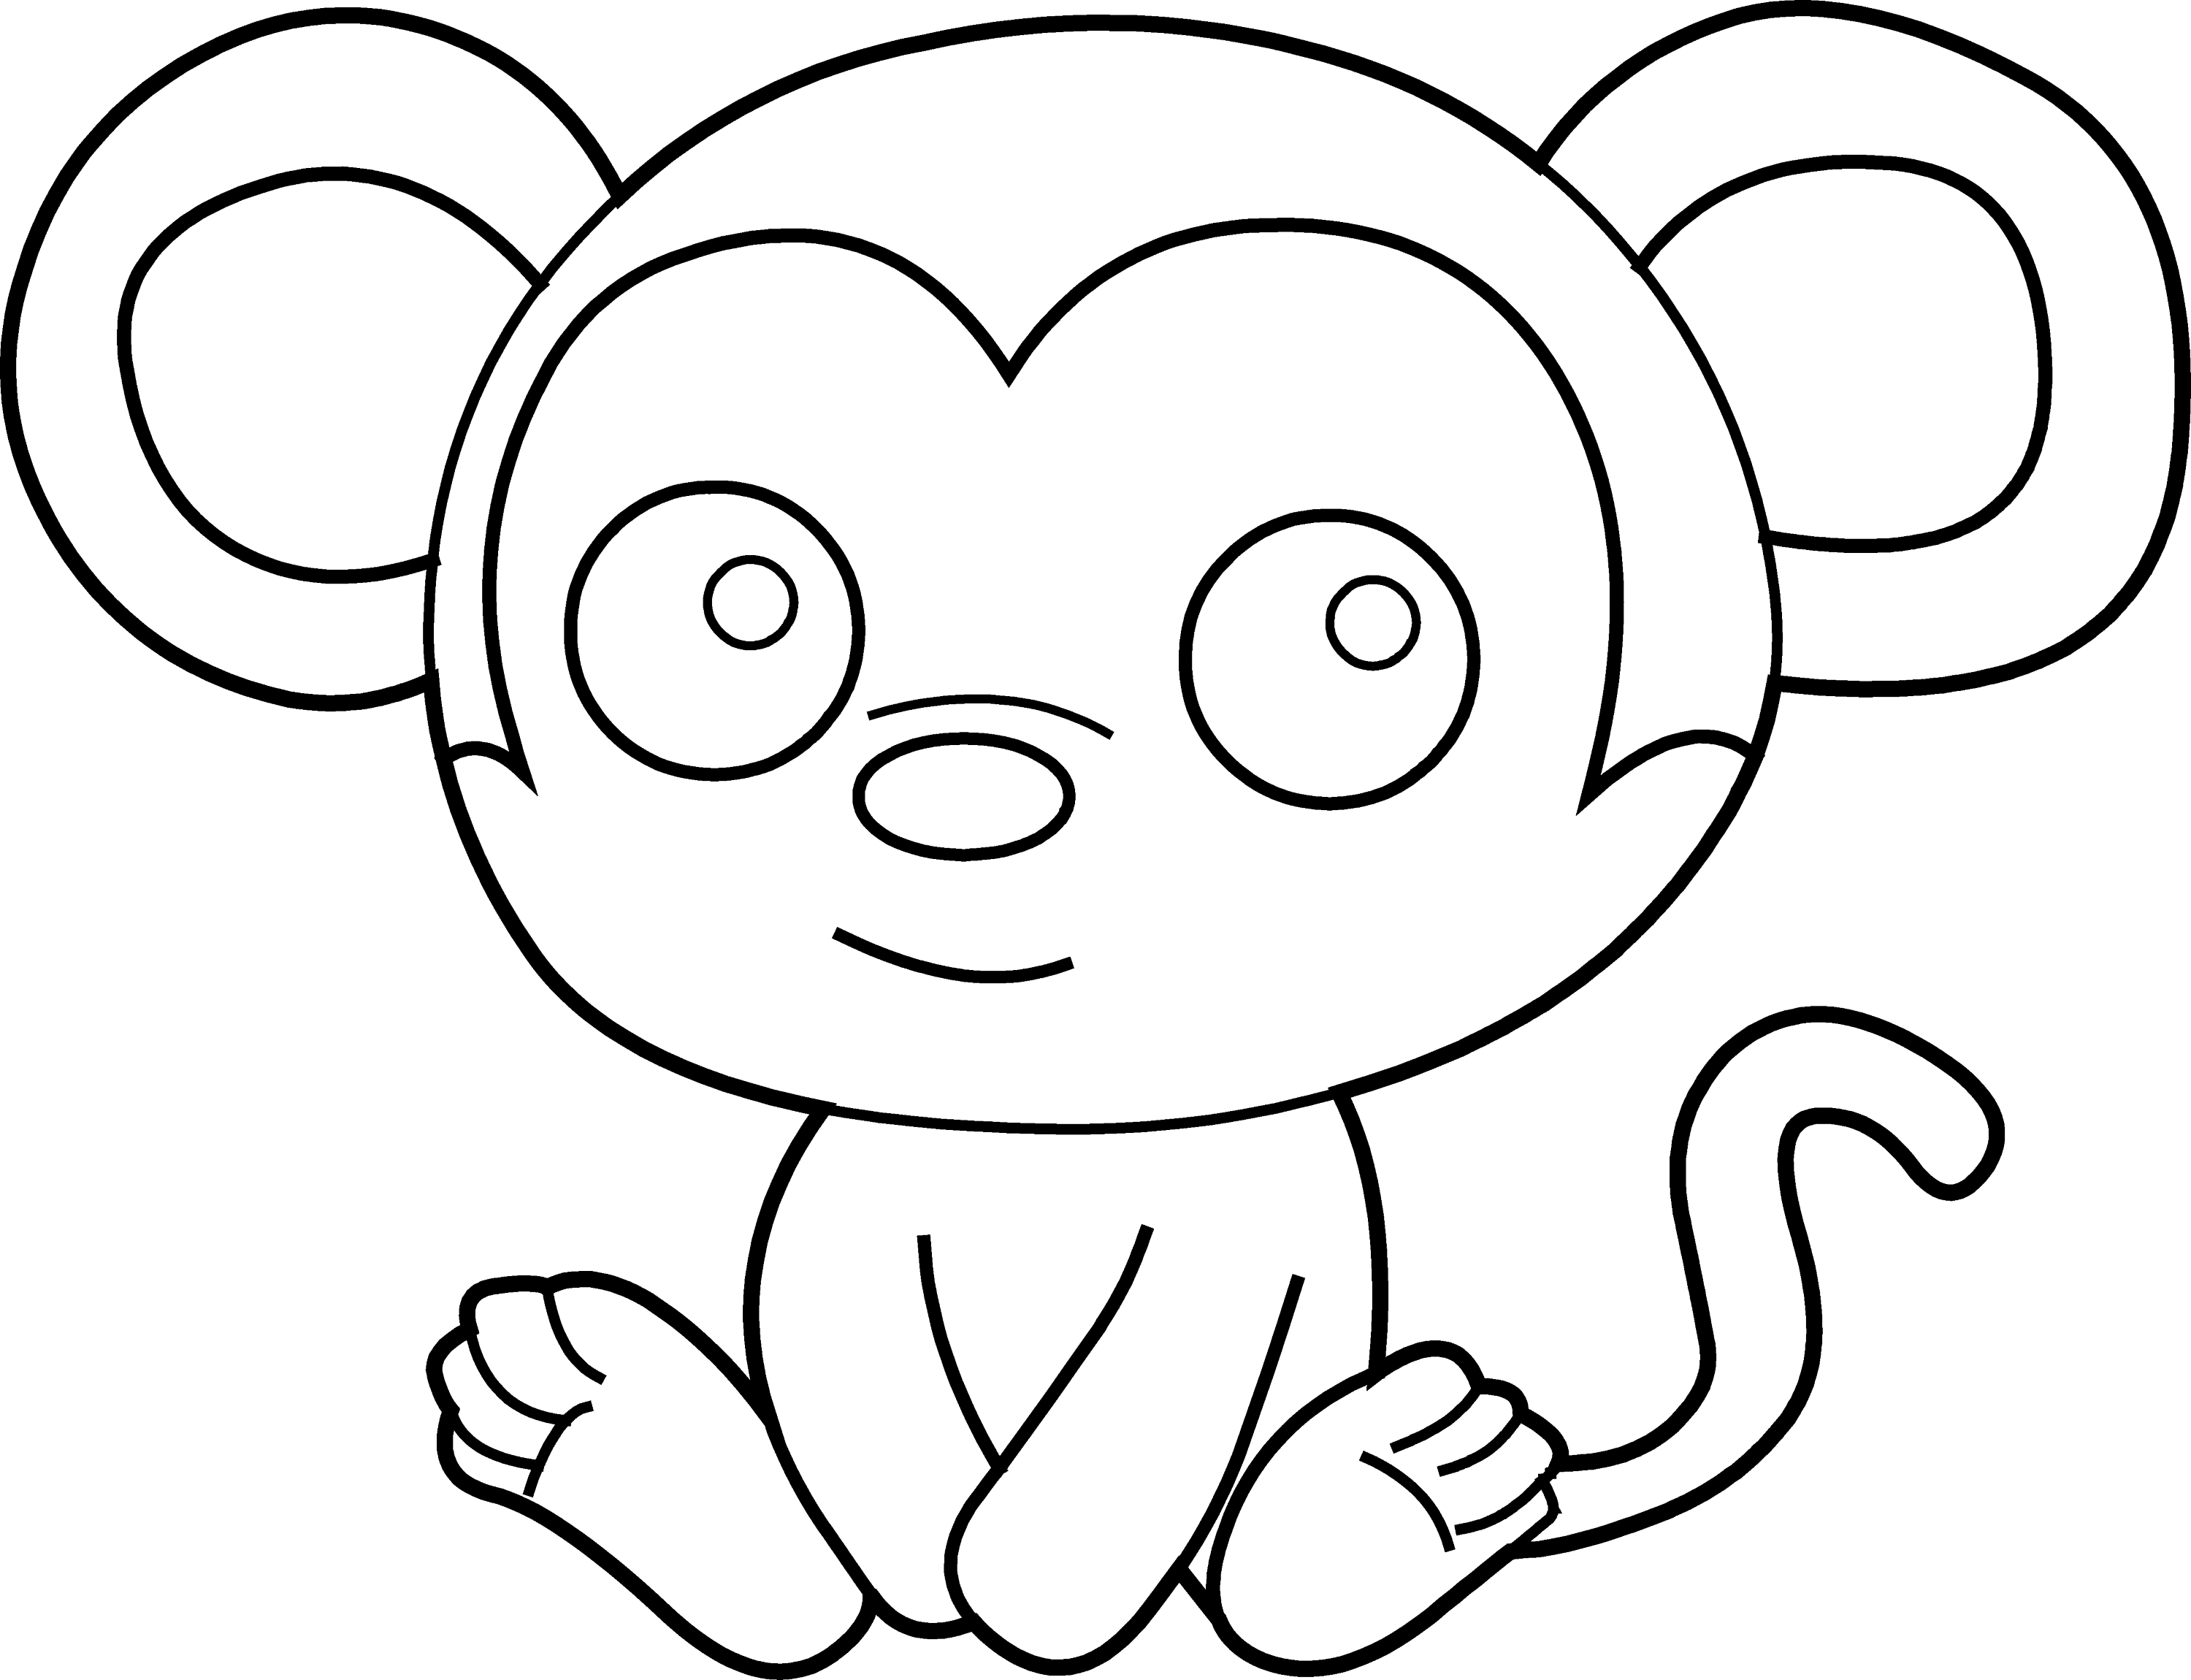 Little Monkey Coloring Page - Free Clip Art